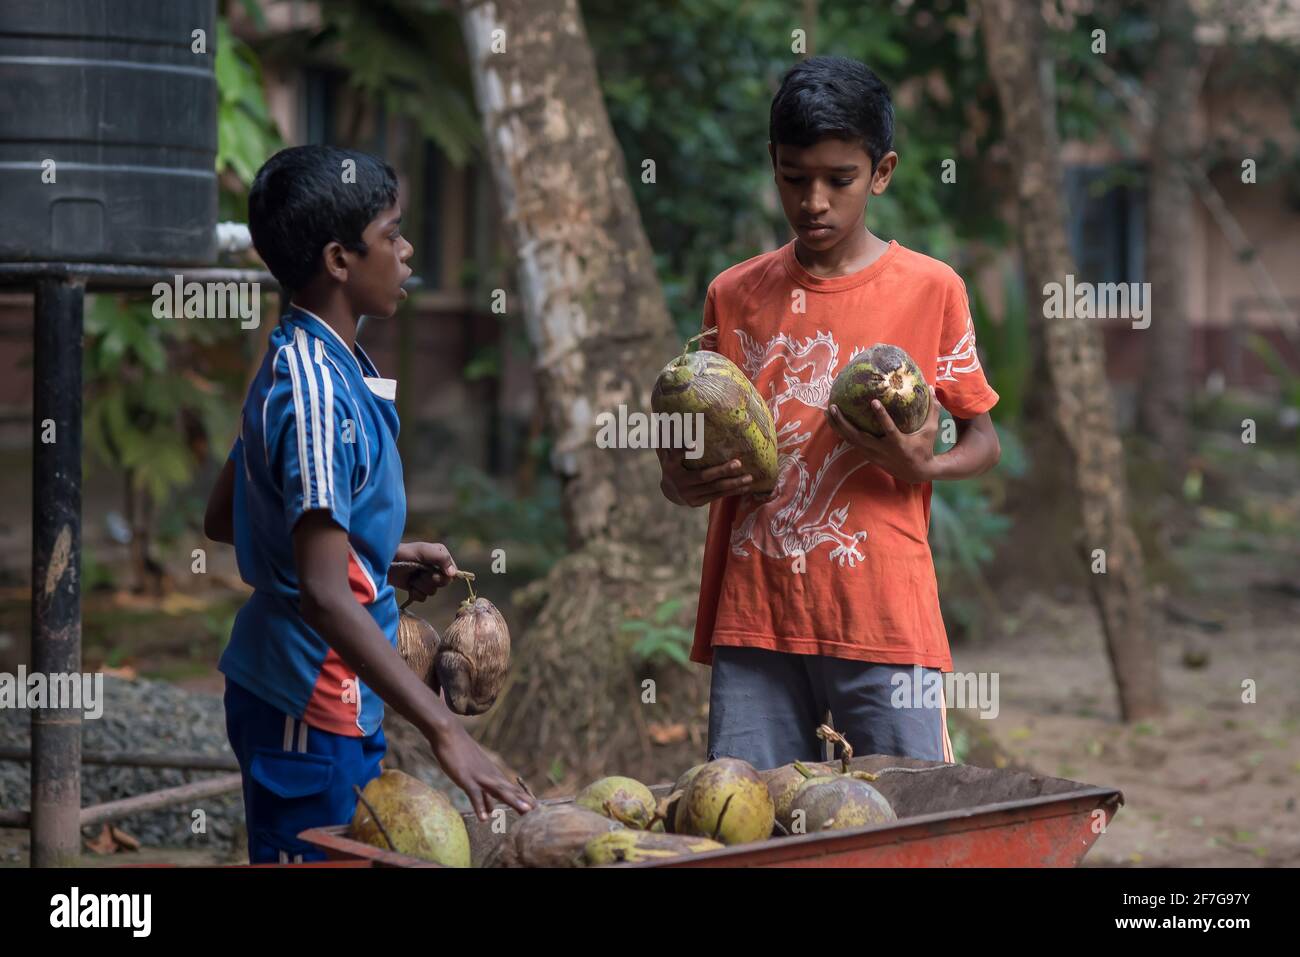 Varanasi, India. 10-16-2019. two male adolescents collecting coconuts from the school premises as part of their responsibilities. Stock Photo